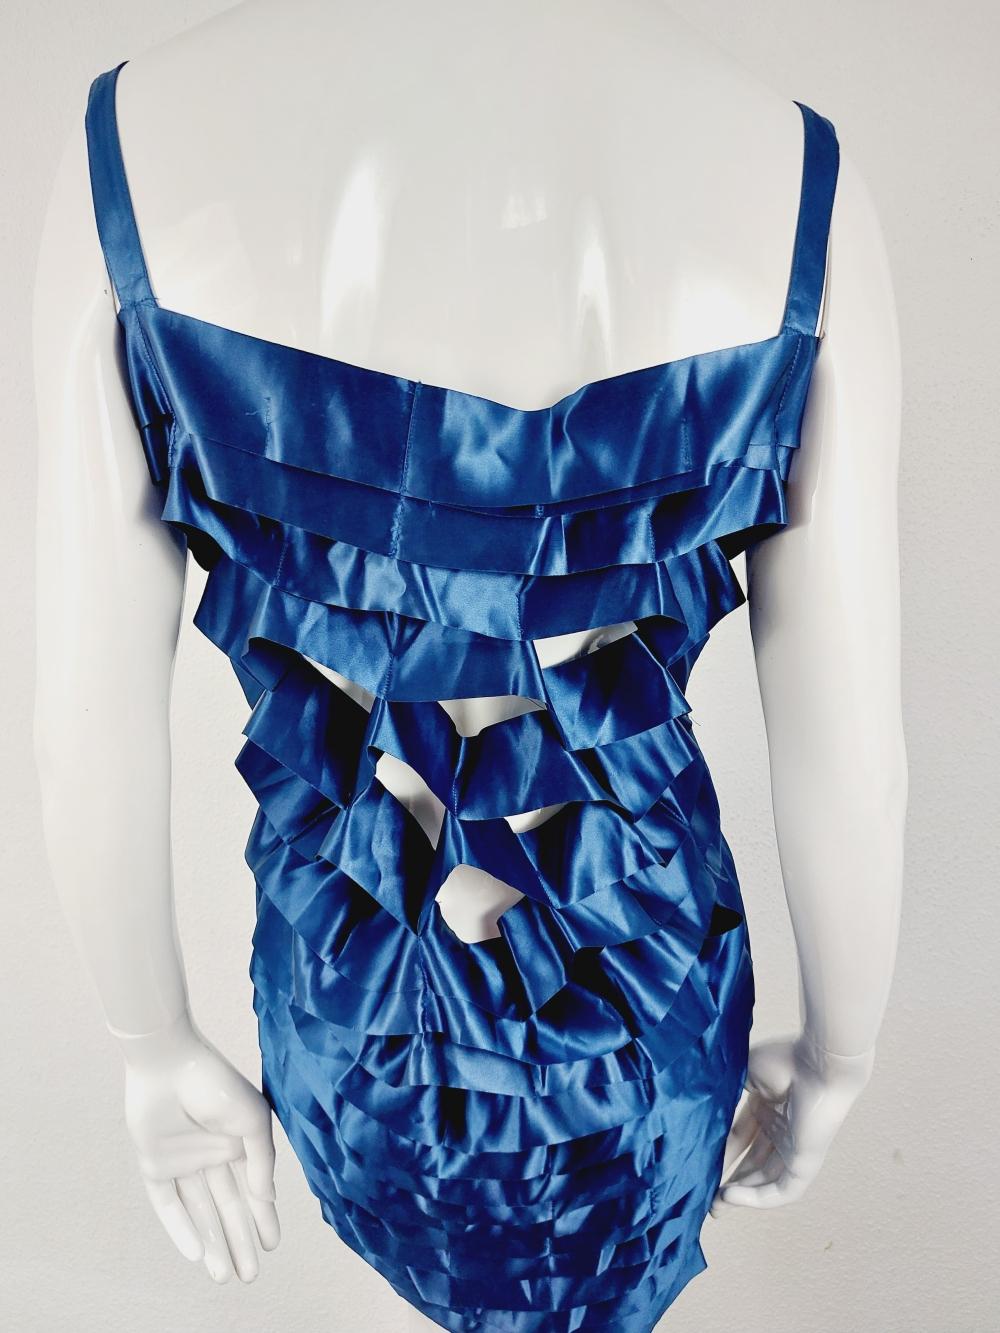 Issey Miyake Sapphire Japanese Blue Satin Ribbon Cage Dress, 1990s For Sale 5